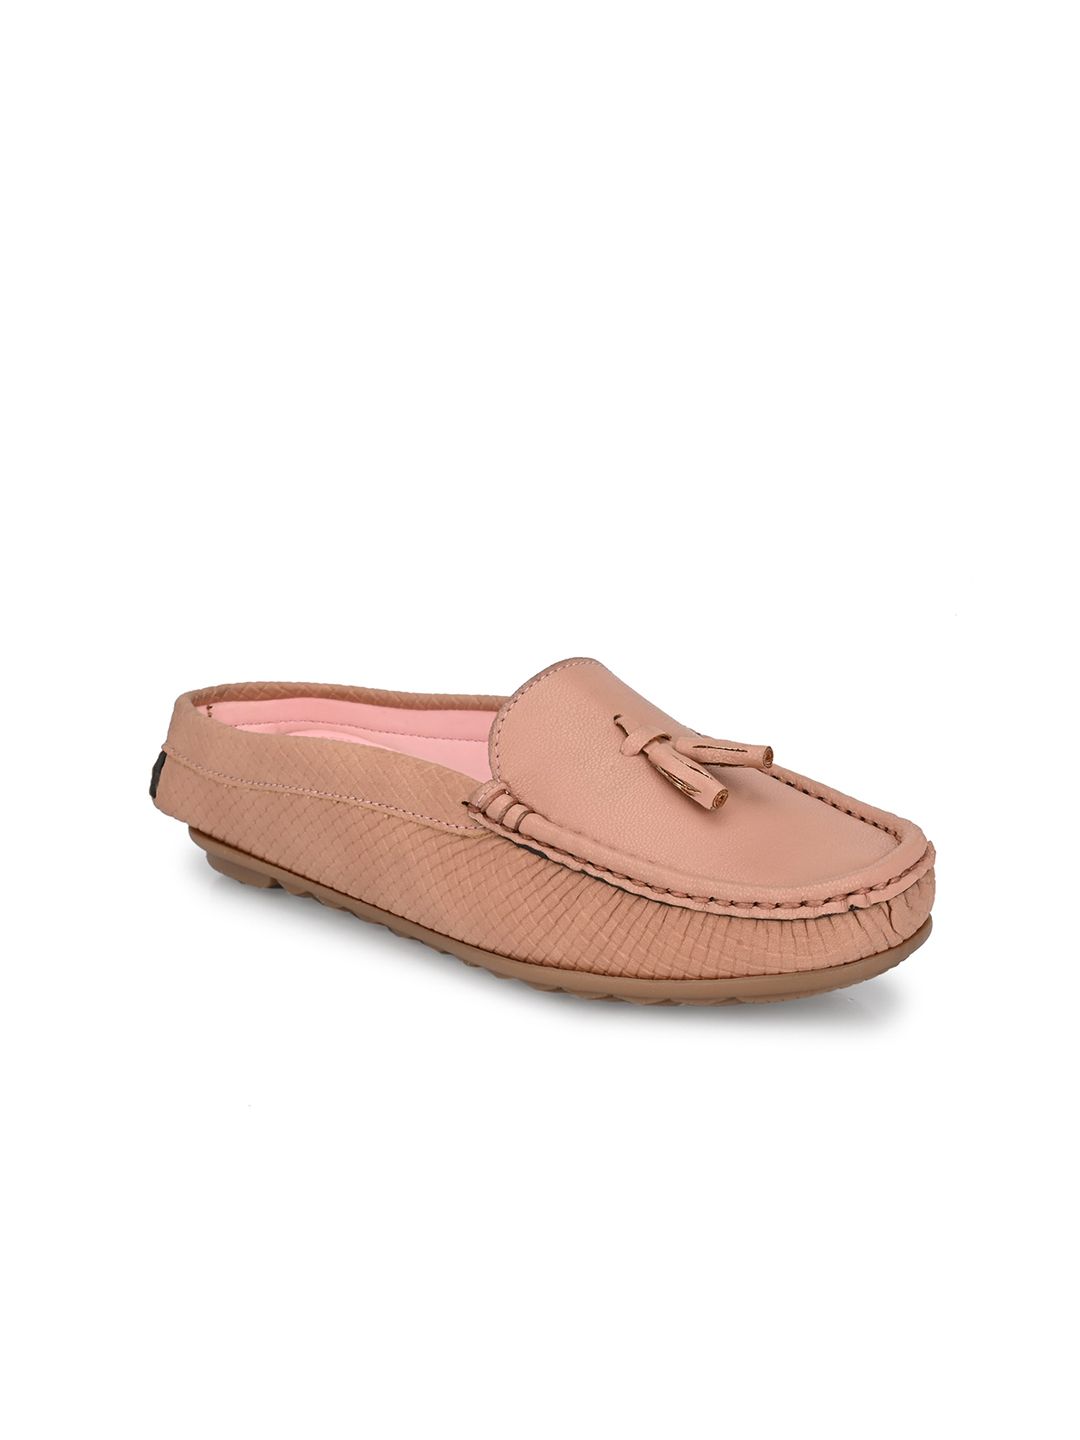 El Paso Women Textured Light Weight Slip On Tassel Loafers Casual Shoes Price in India